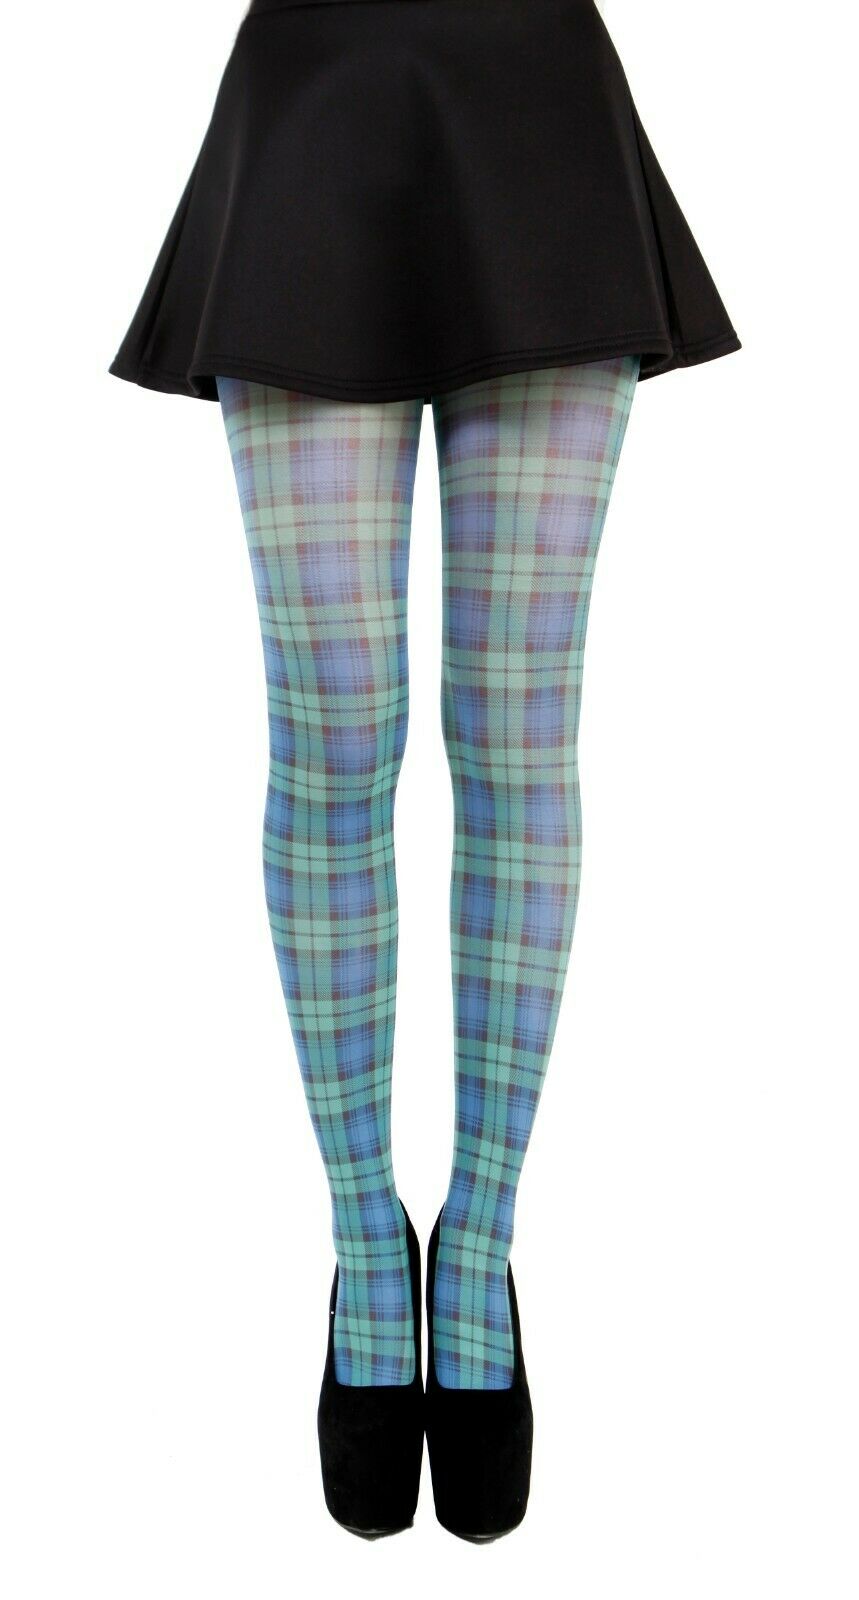 Scottish Tartan / Argyle Print Tights Available In 2 Styles (Made In Italy)